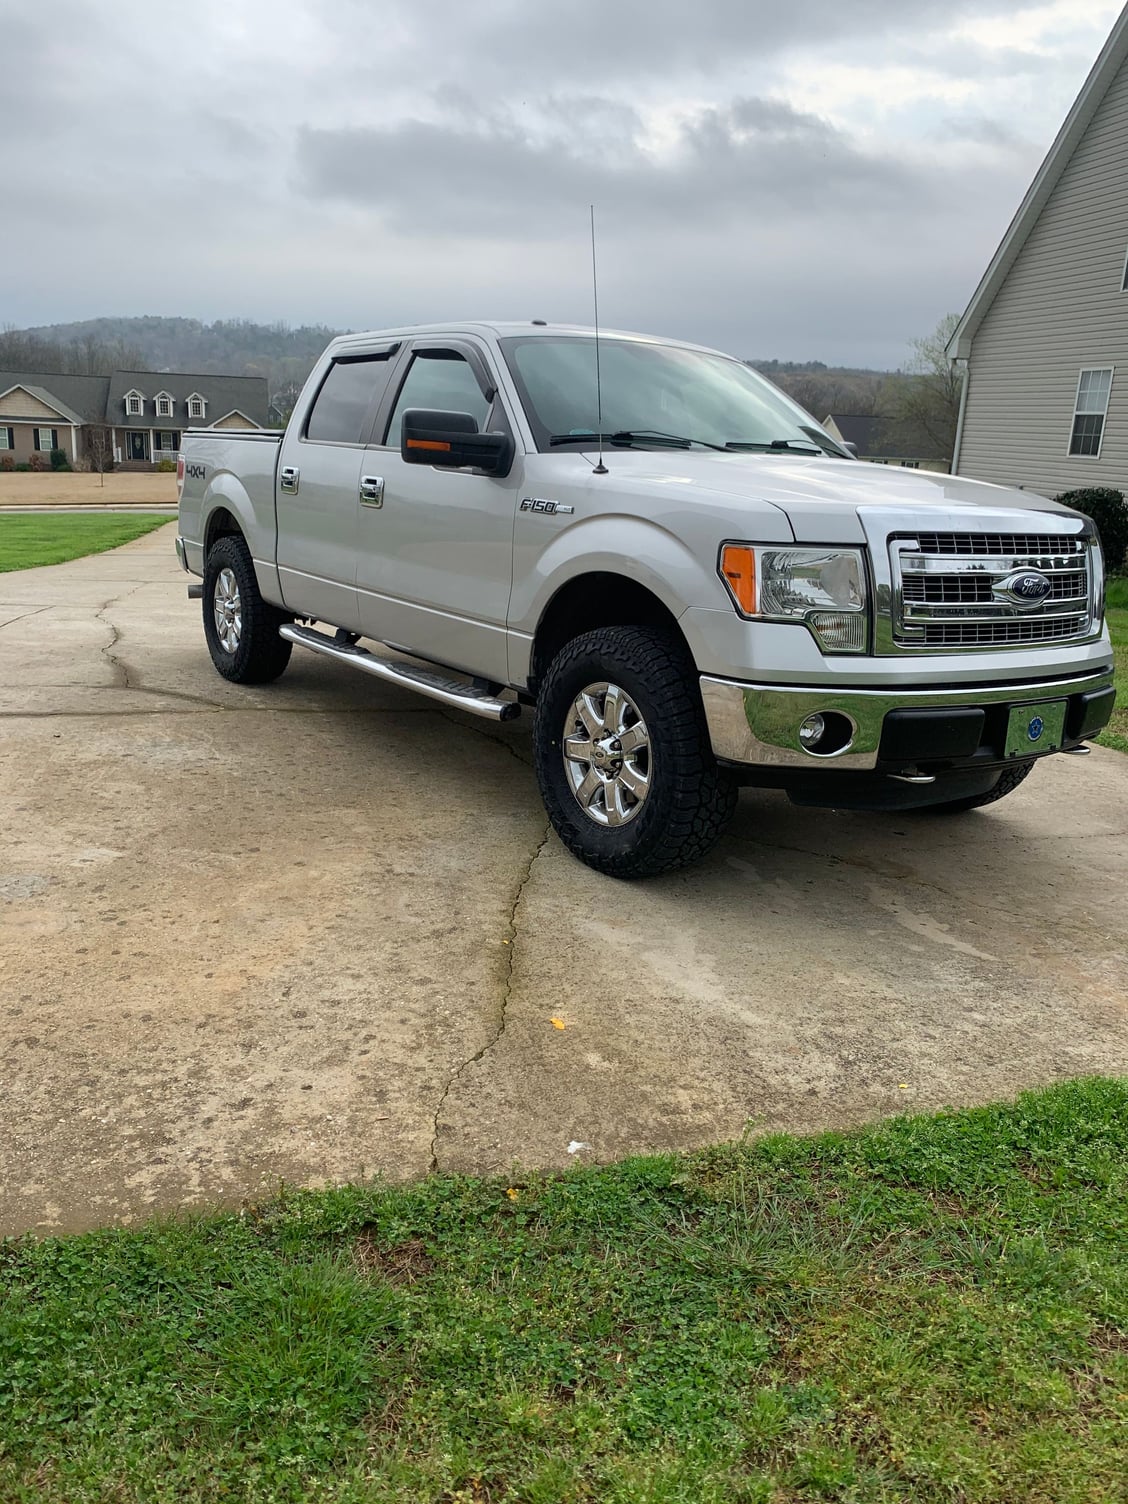 New tires - Ford F150 Forum - Community of Ford Truck Fans